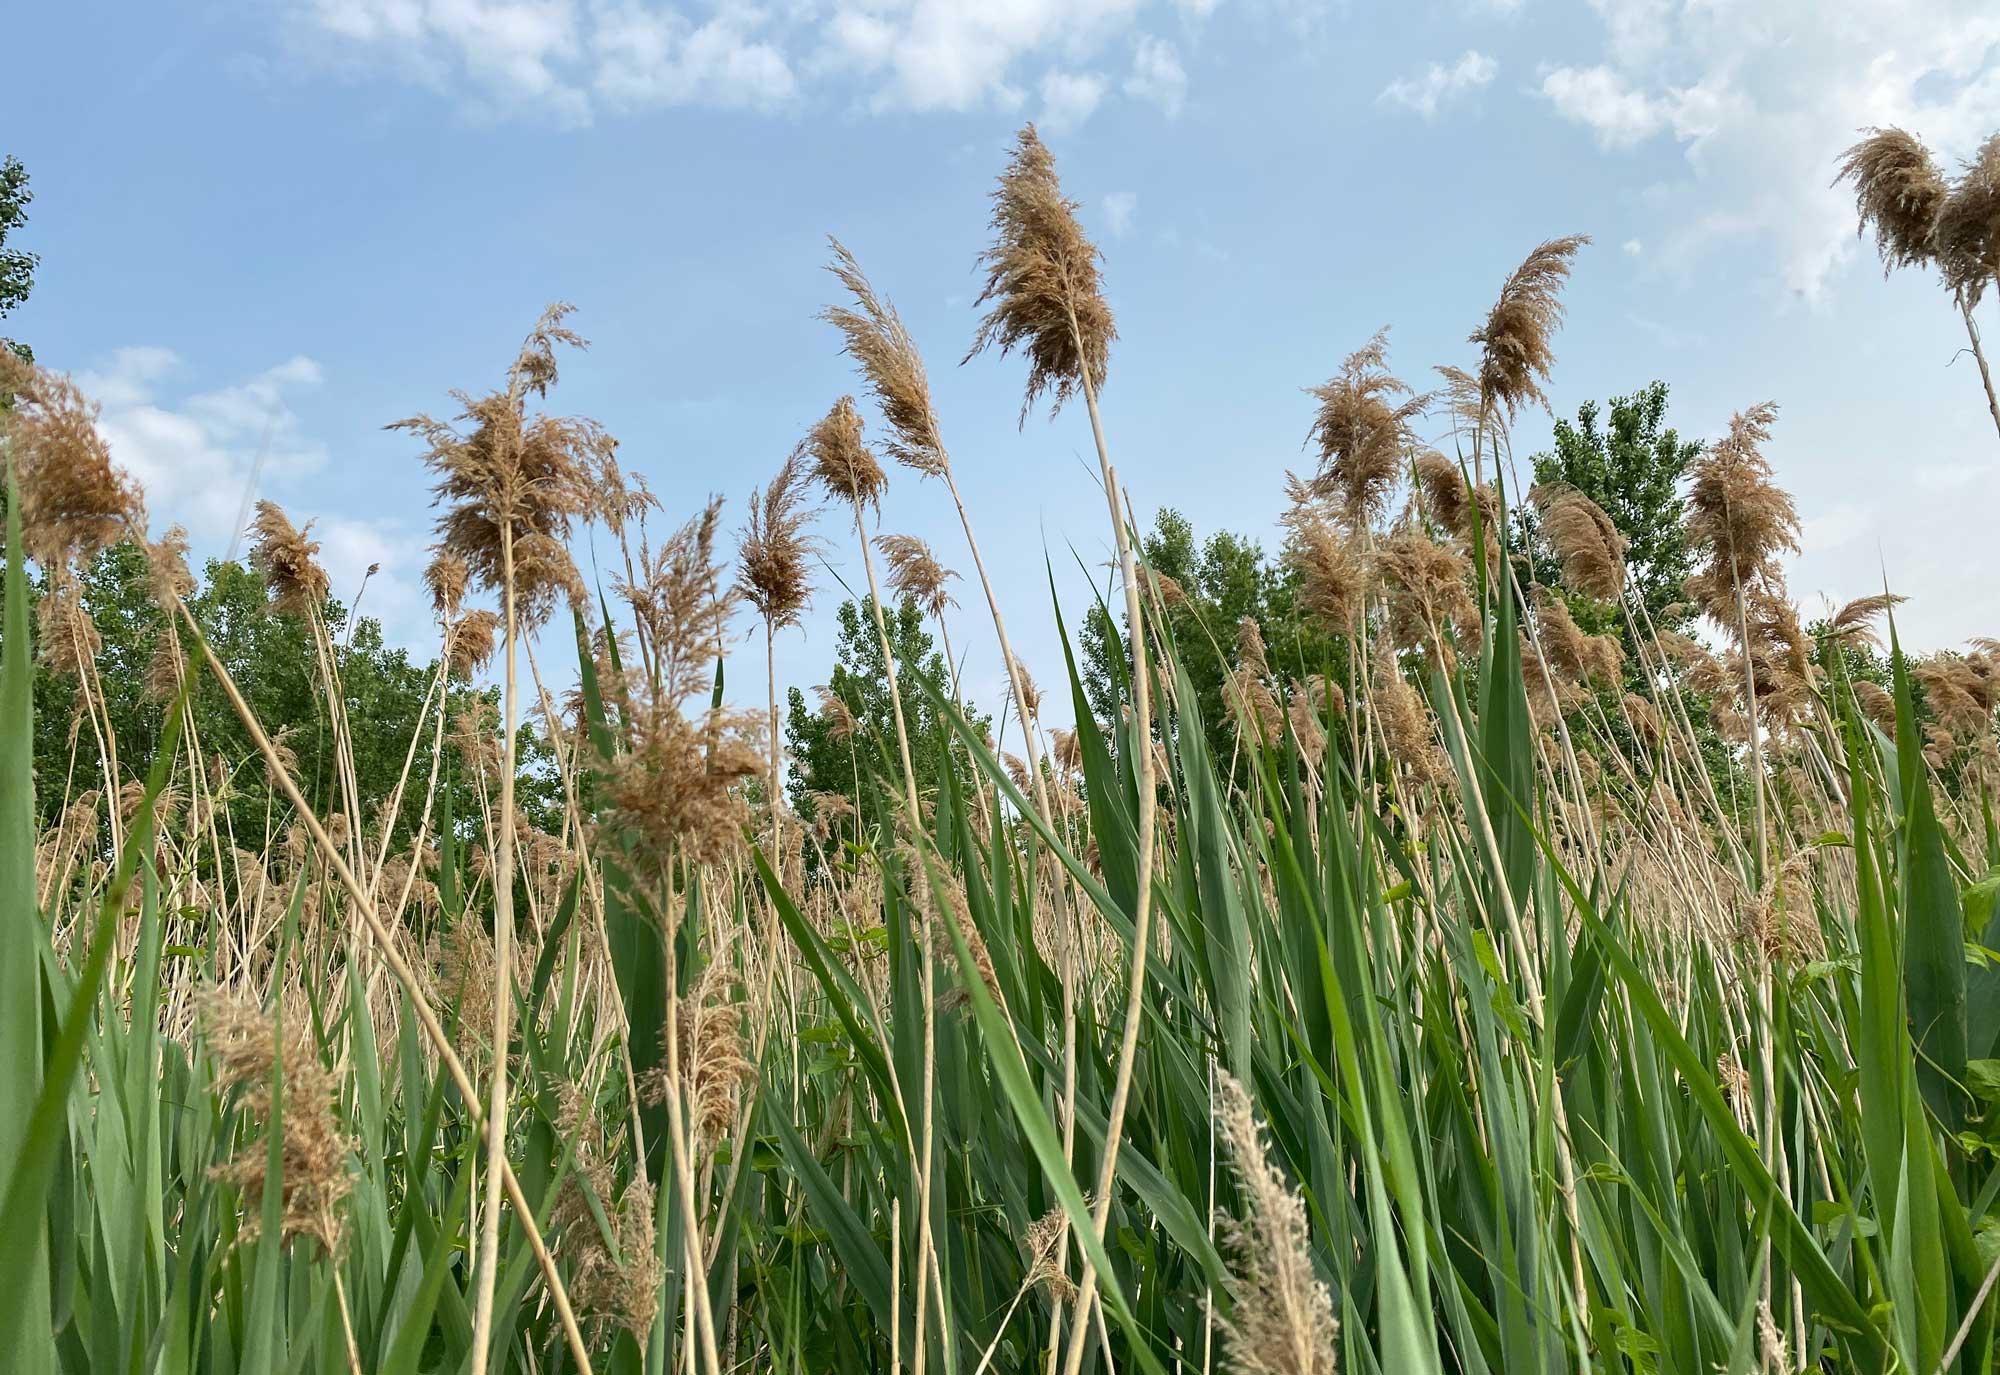 Phragmites stand tall along a trail, with blue sky in the background.